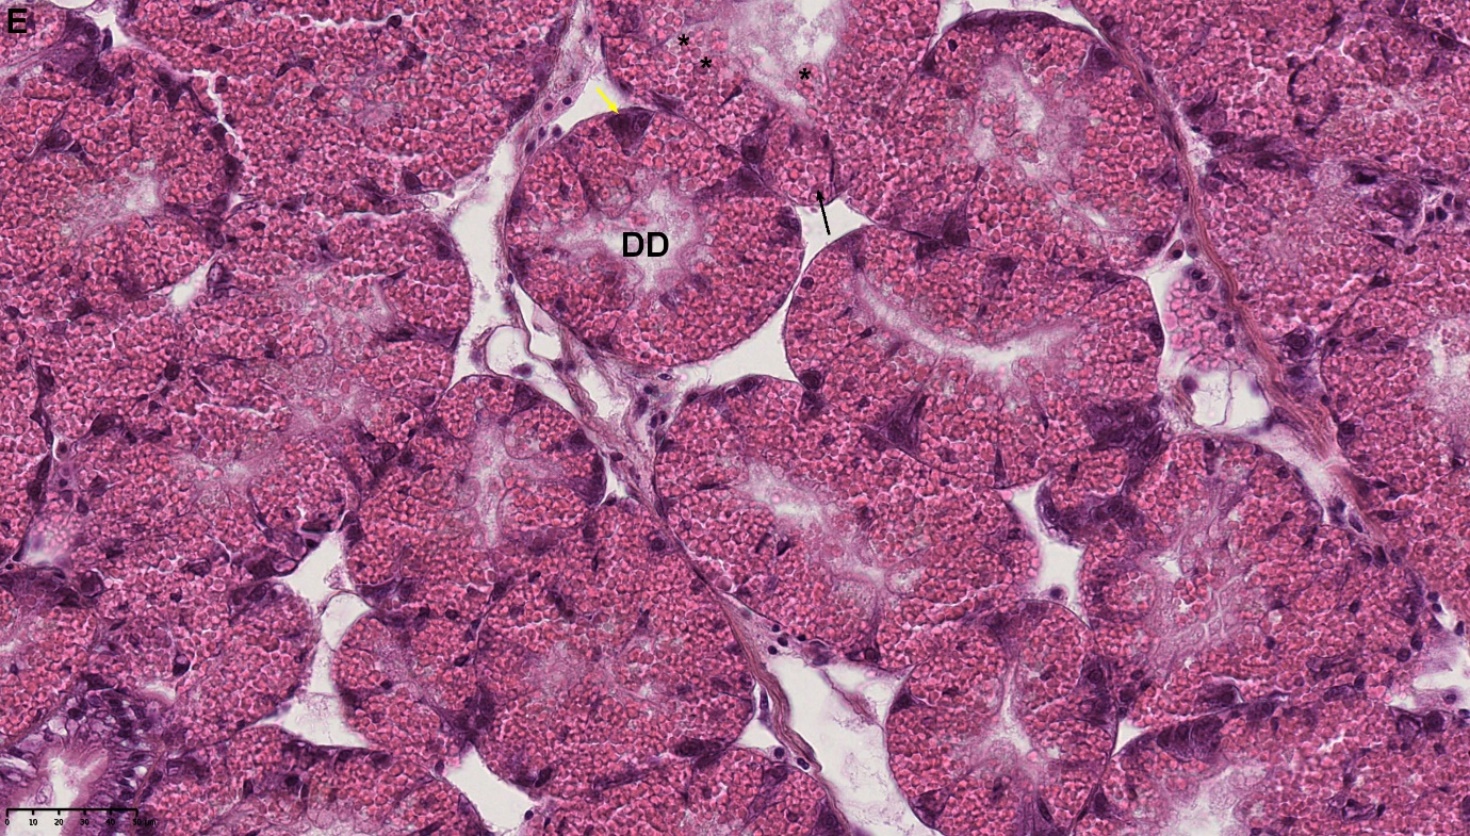 Figure 1. E) Normal tubules filled with lysosomes in the digestive cells; basophilic cells (yellow arrow); digestive cell (black arrow); the lysosomes appear to be released into the lumen in some tubules (Asterix). HES stained. NDP view 2, 40X. 